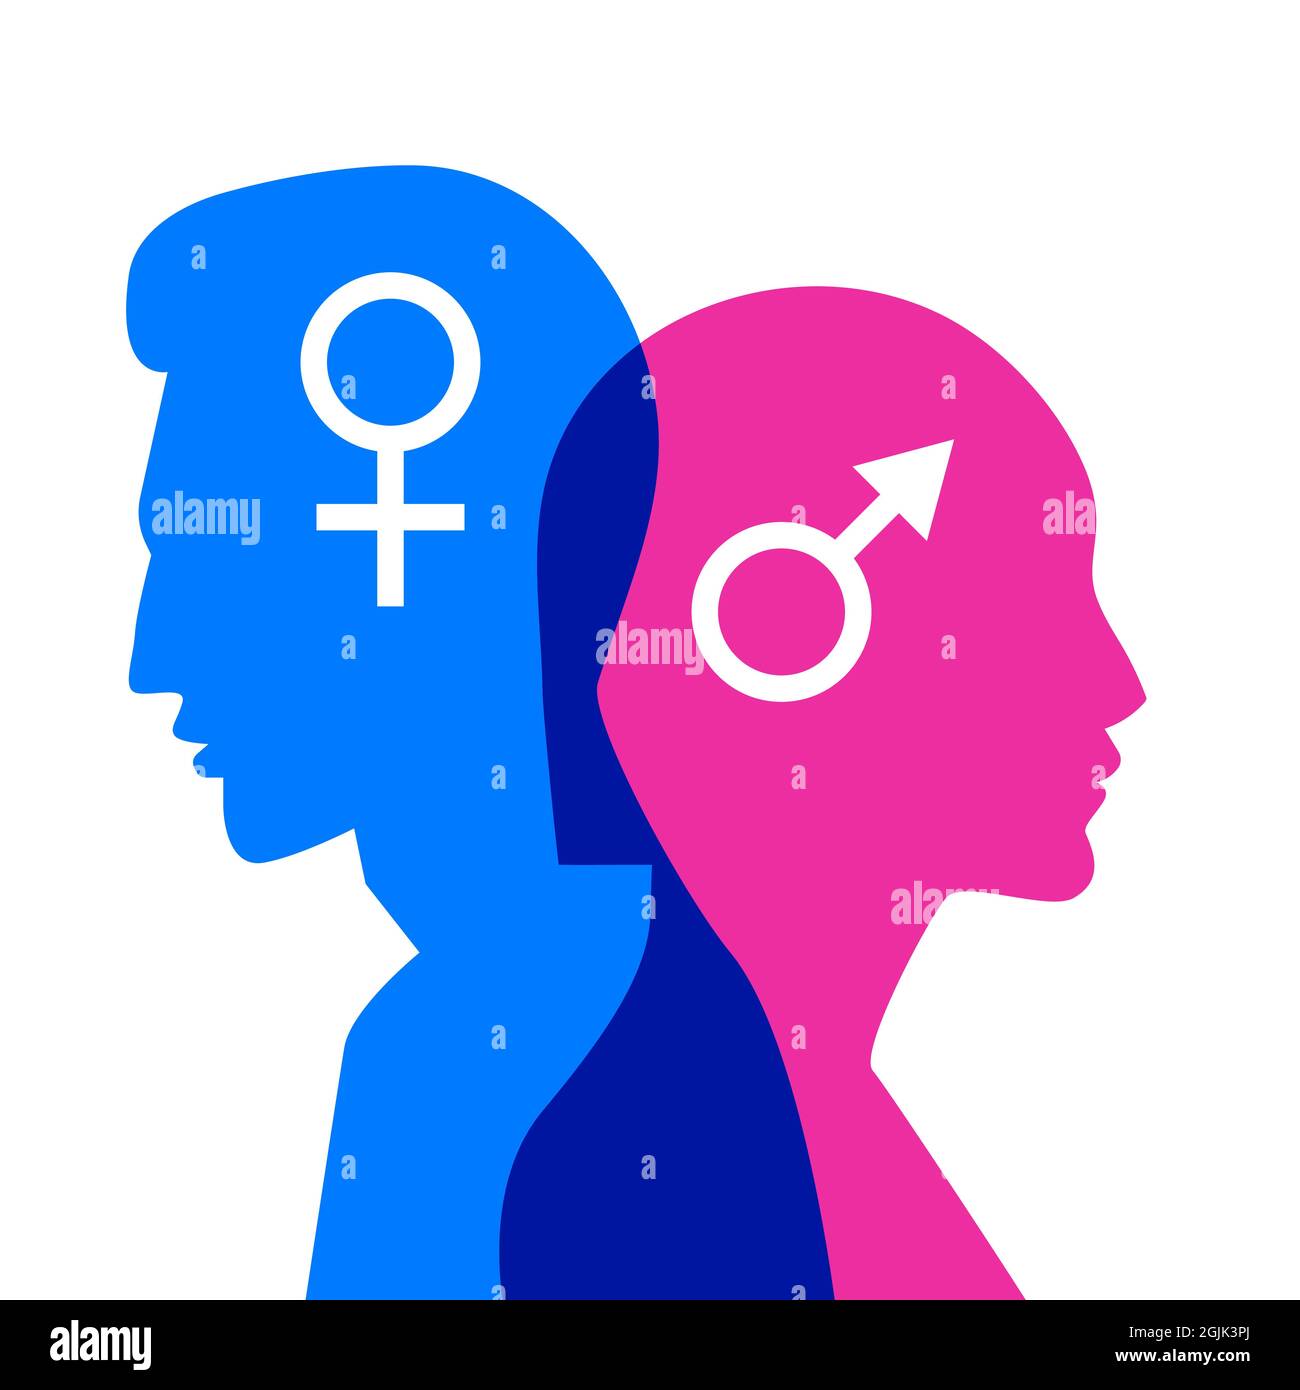 Quarrel or divorce between man and woman. Therapy of married couple. Gender issues. Psychology of relationships. Conflict in marriage. Vector illustra Stock Vector